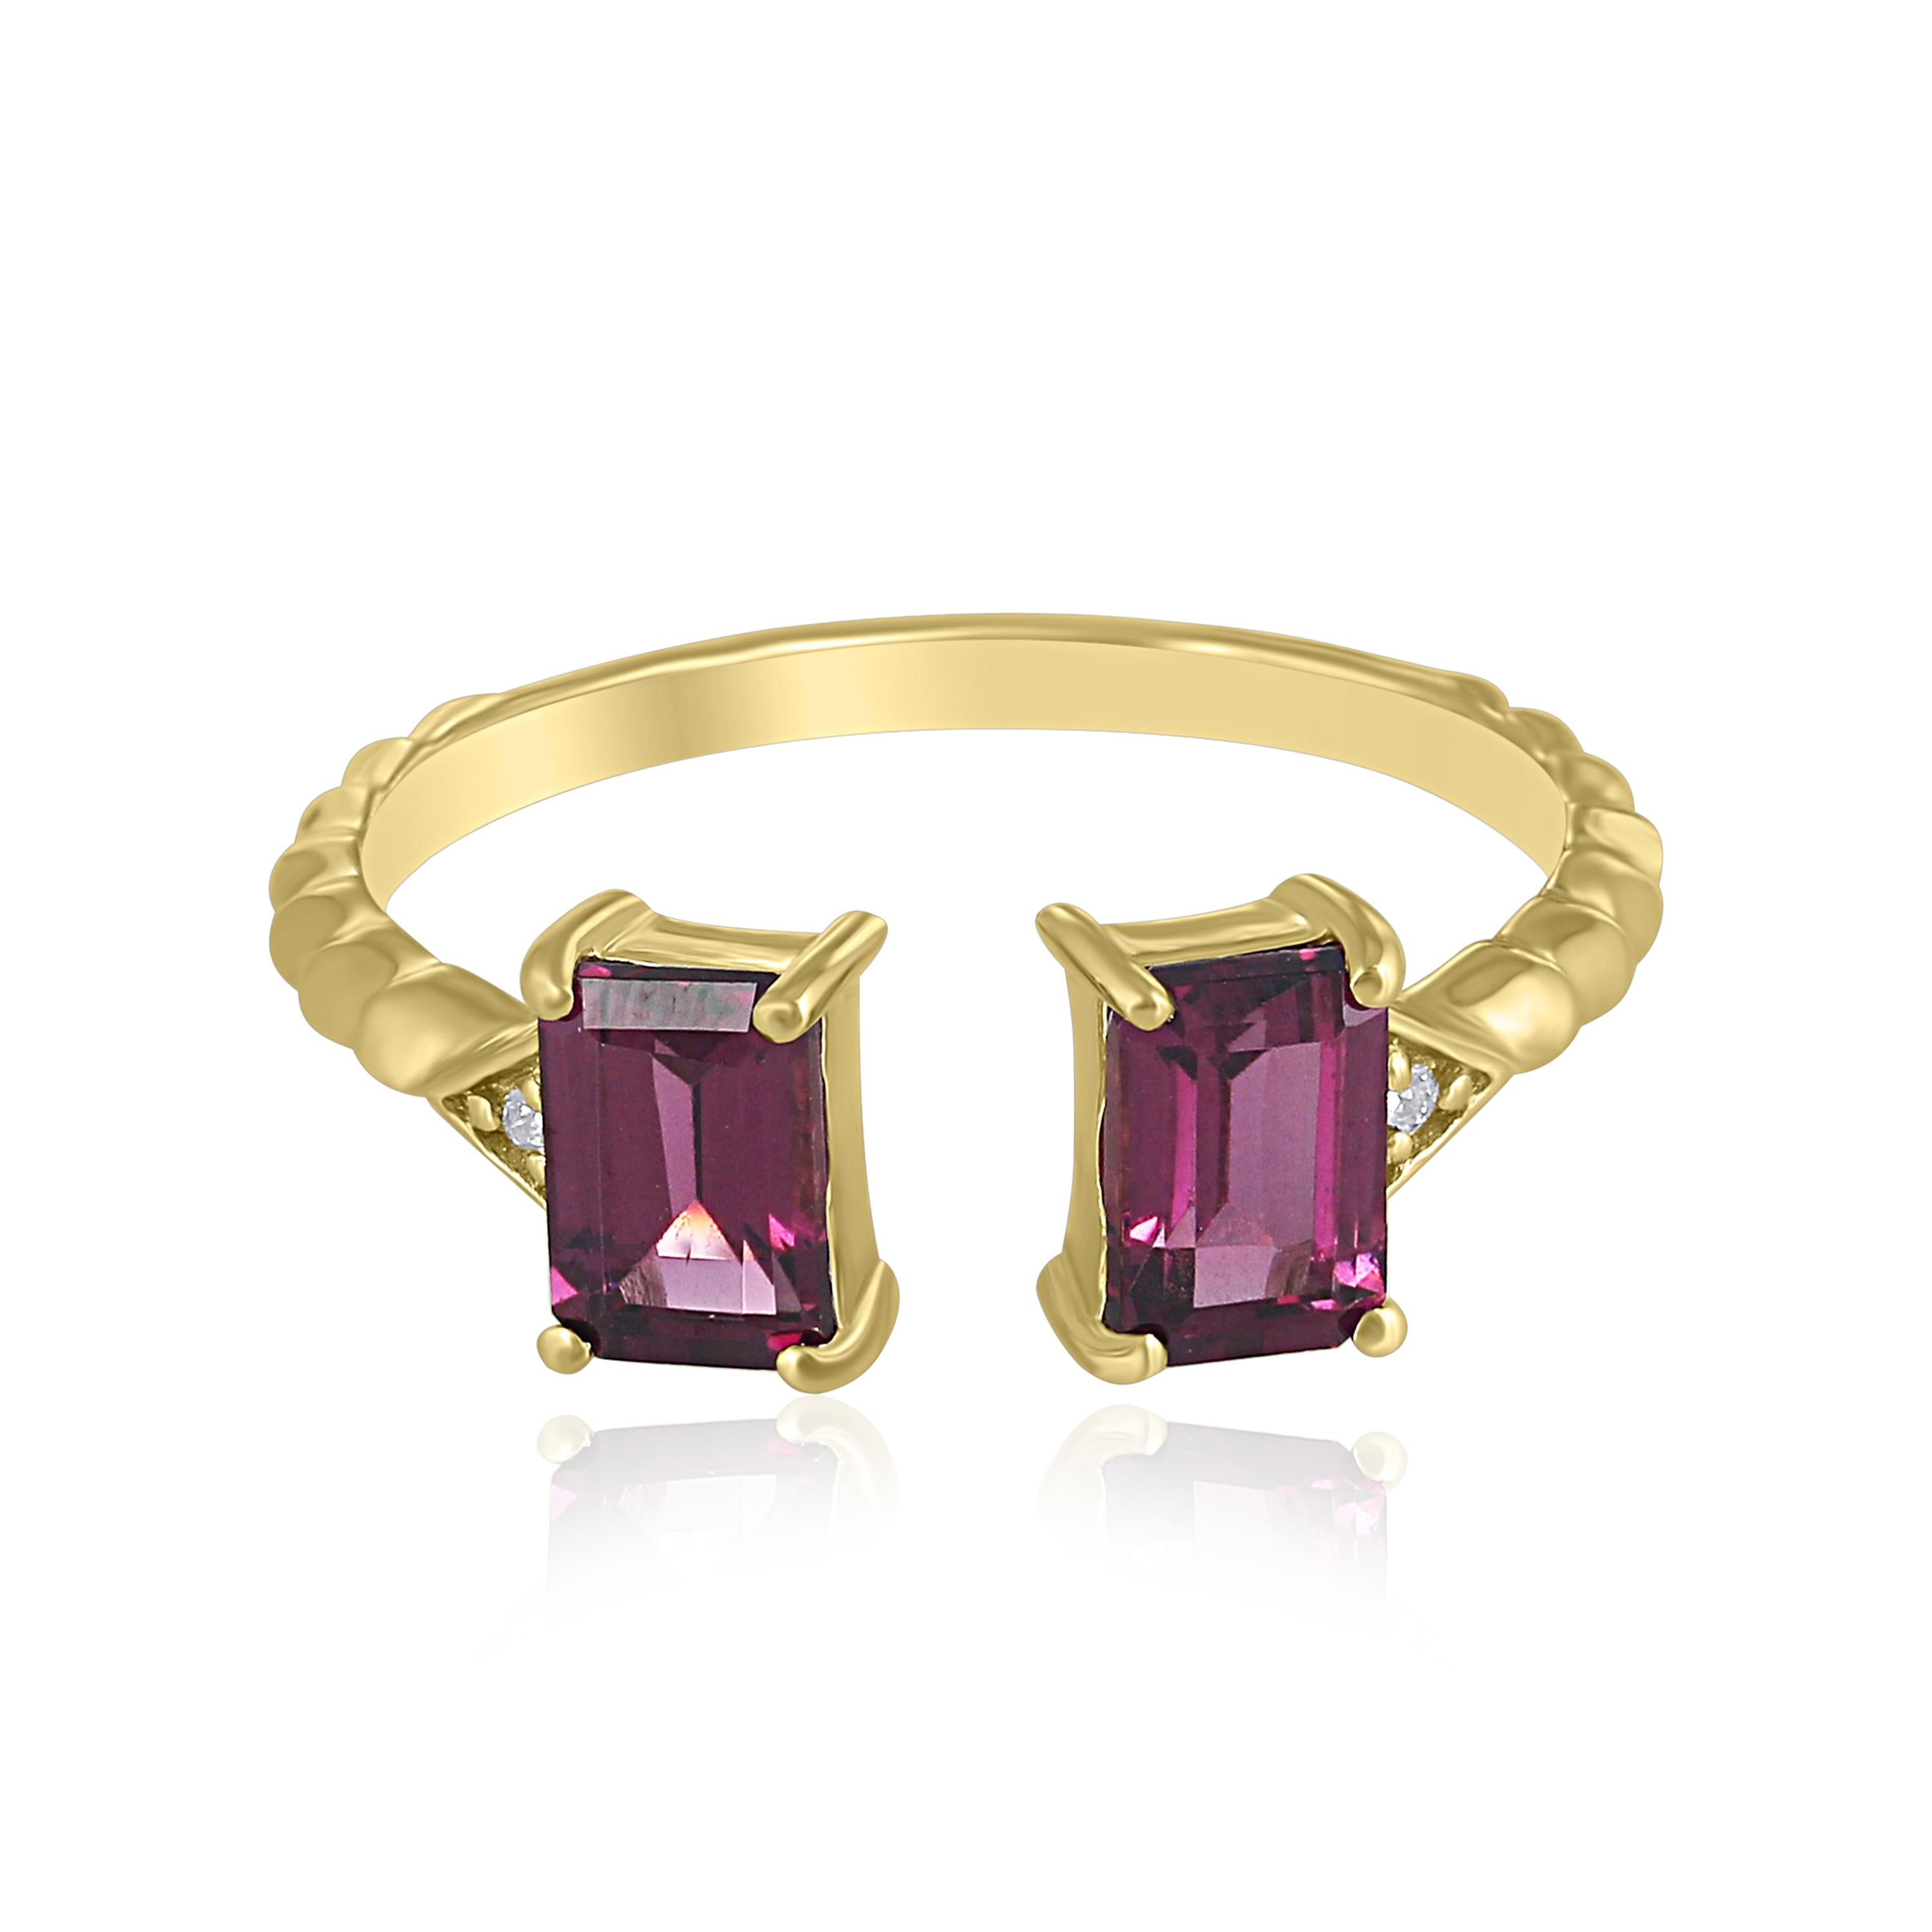 Octagon Cut Gemistry 1.57 Cttw. Rhodolite and Diamond Cuff Ring in 14K Yellow Gold For Sale